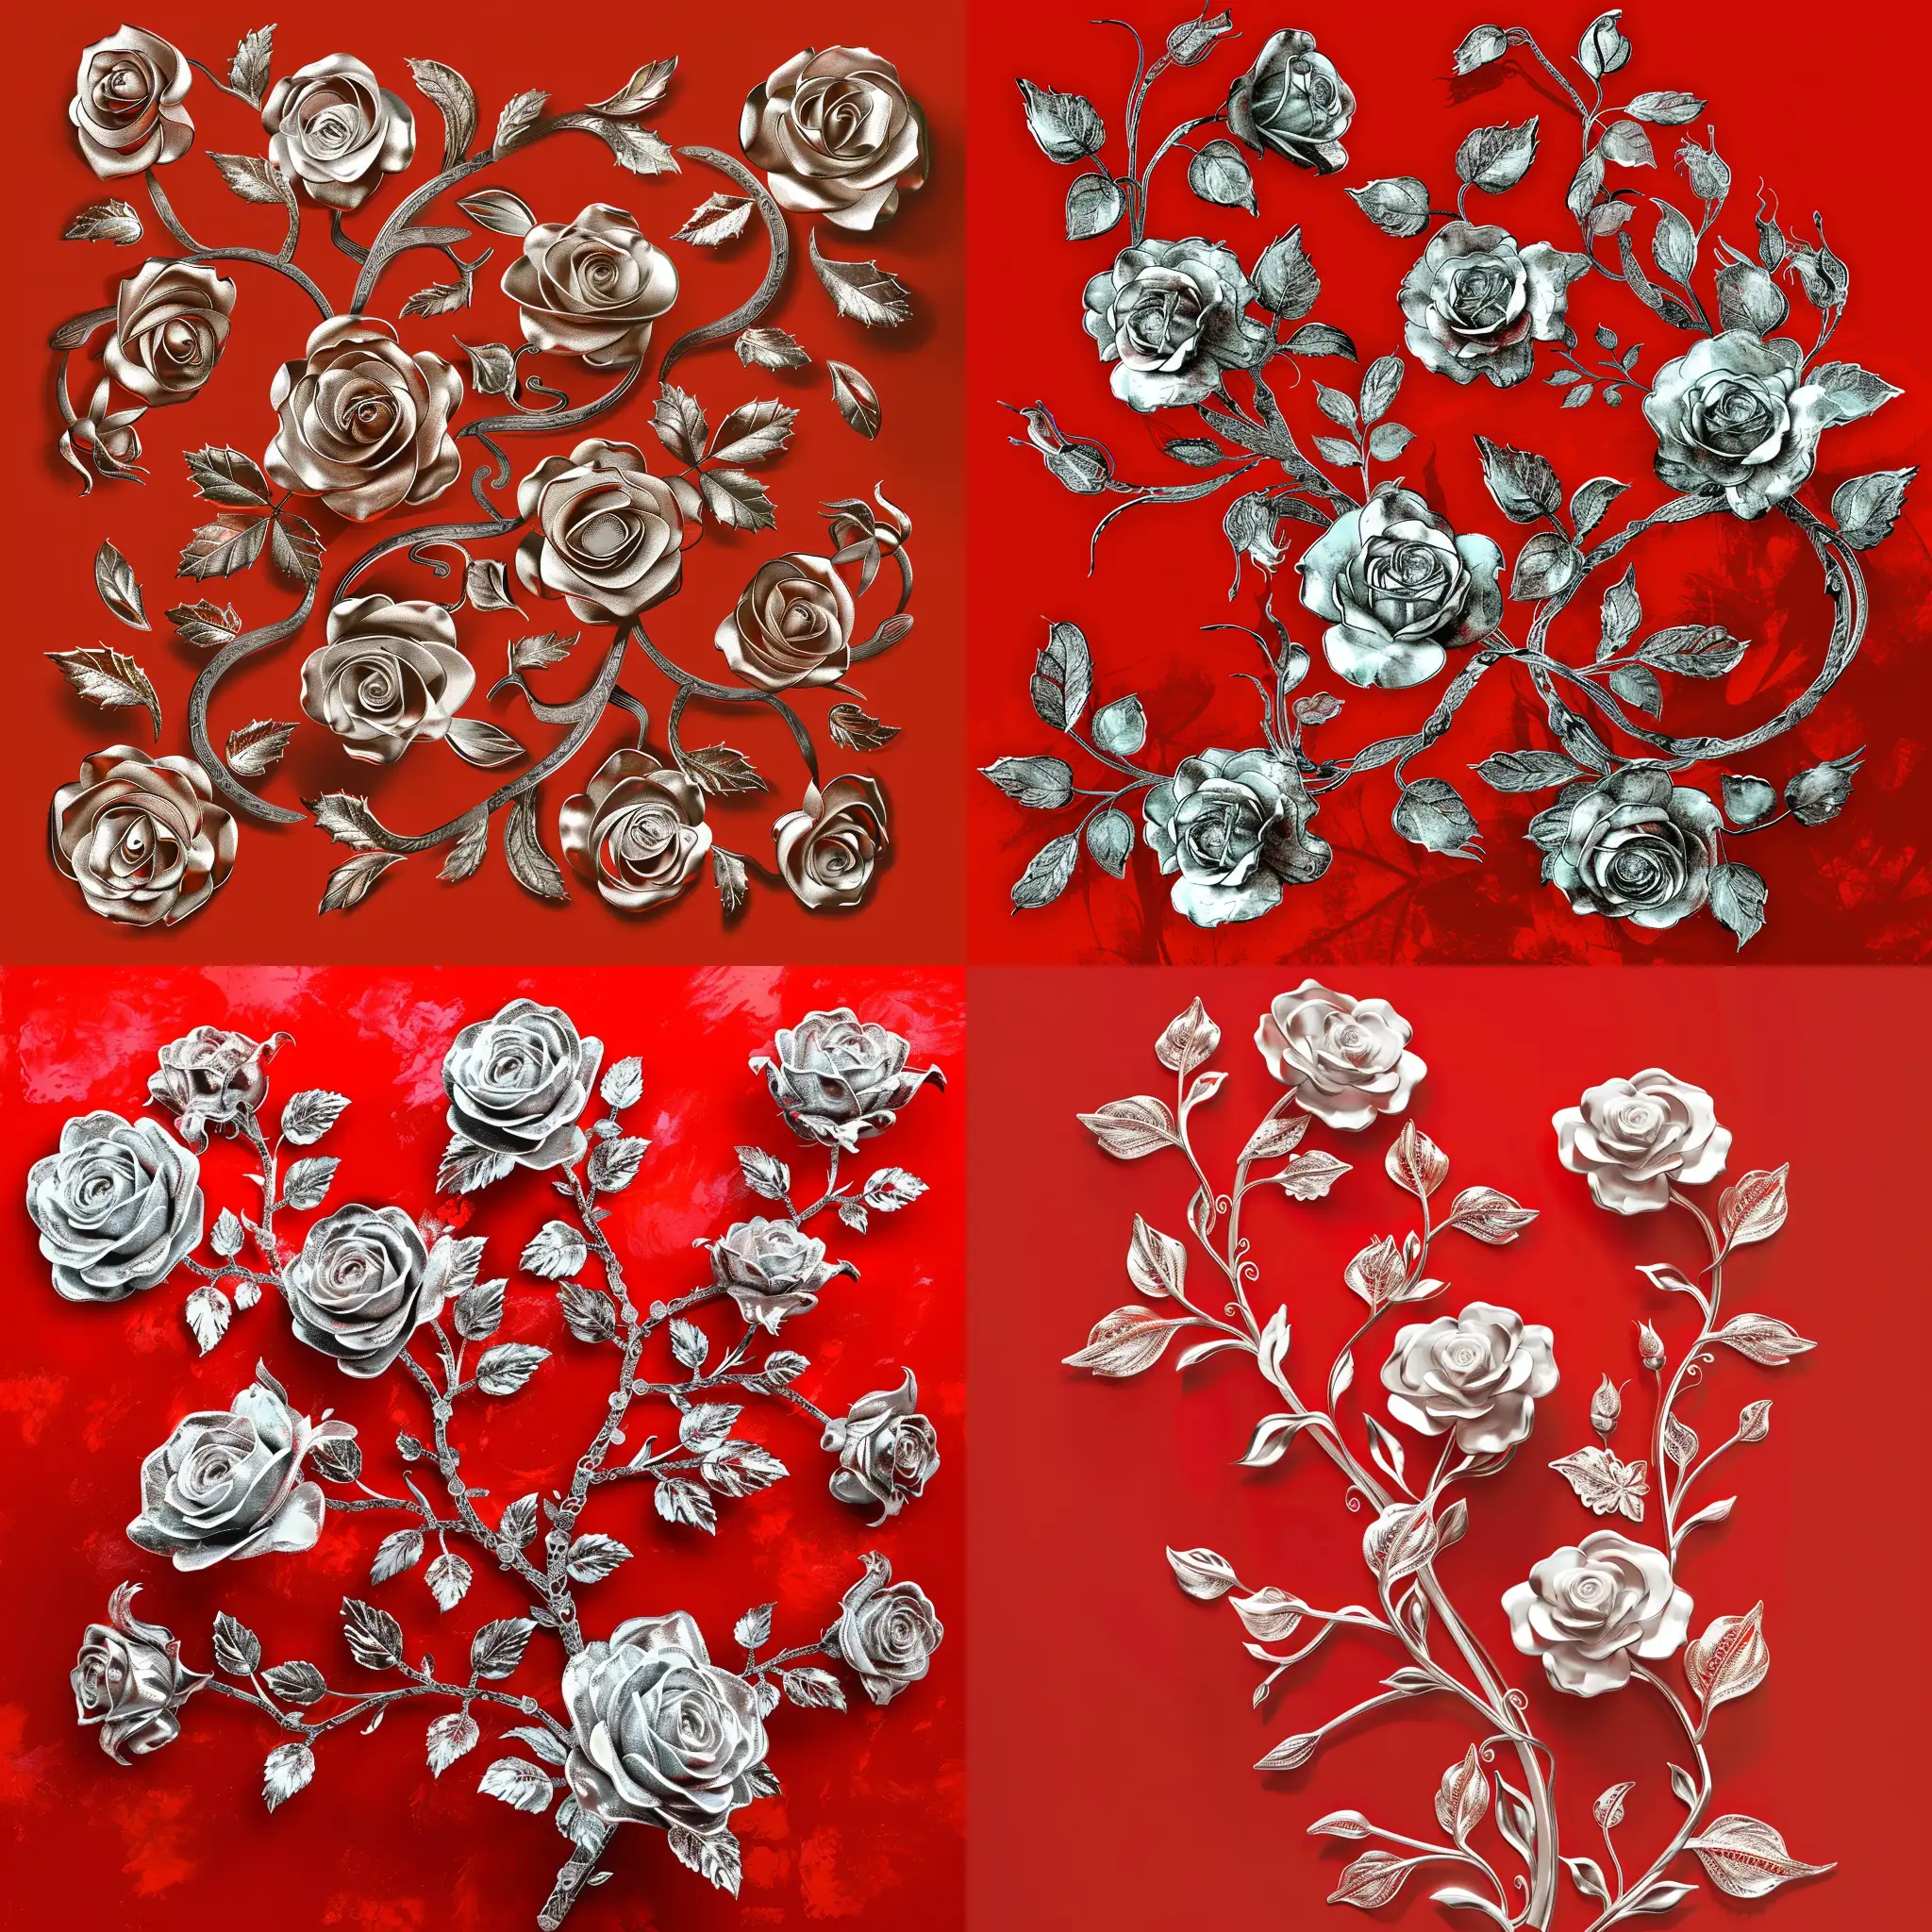 Silver-Rose-Filigree-on-Bright-Red-Background